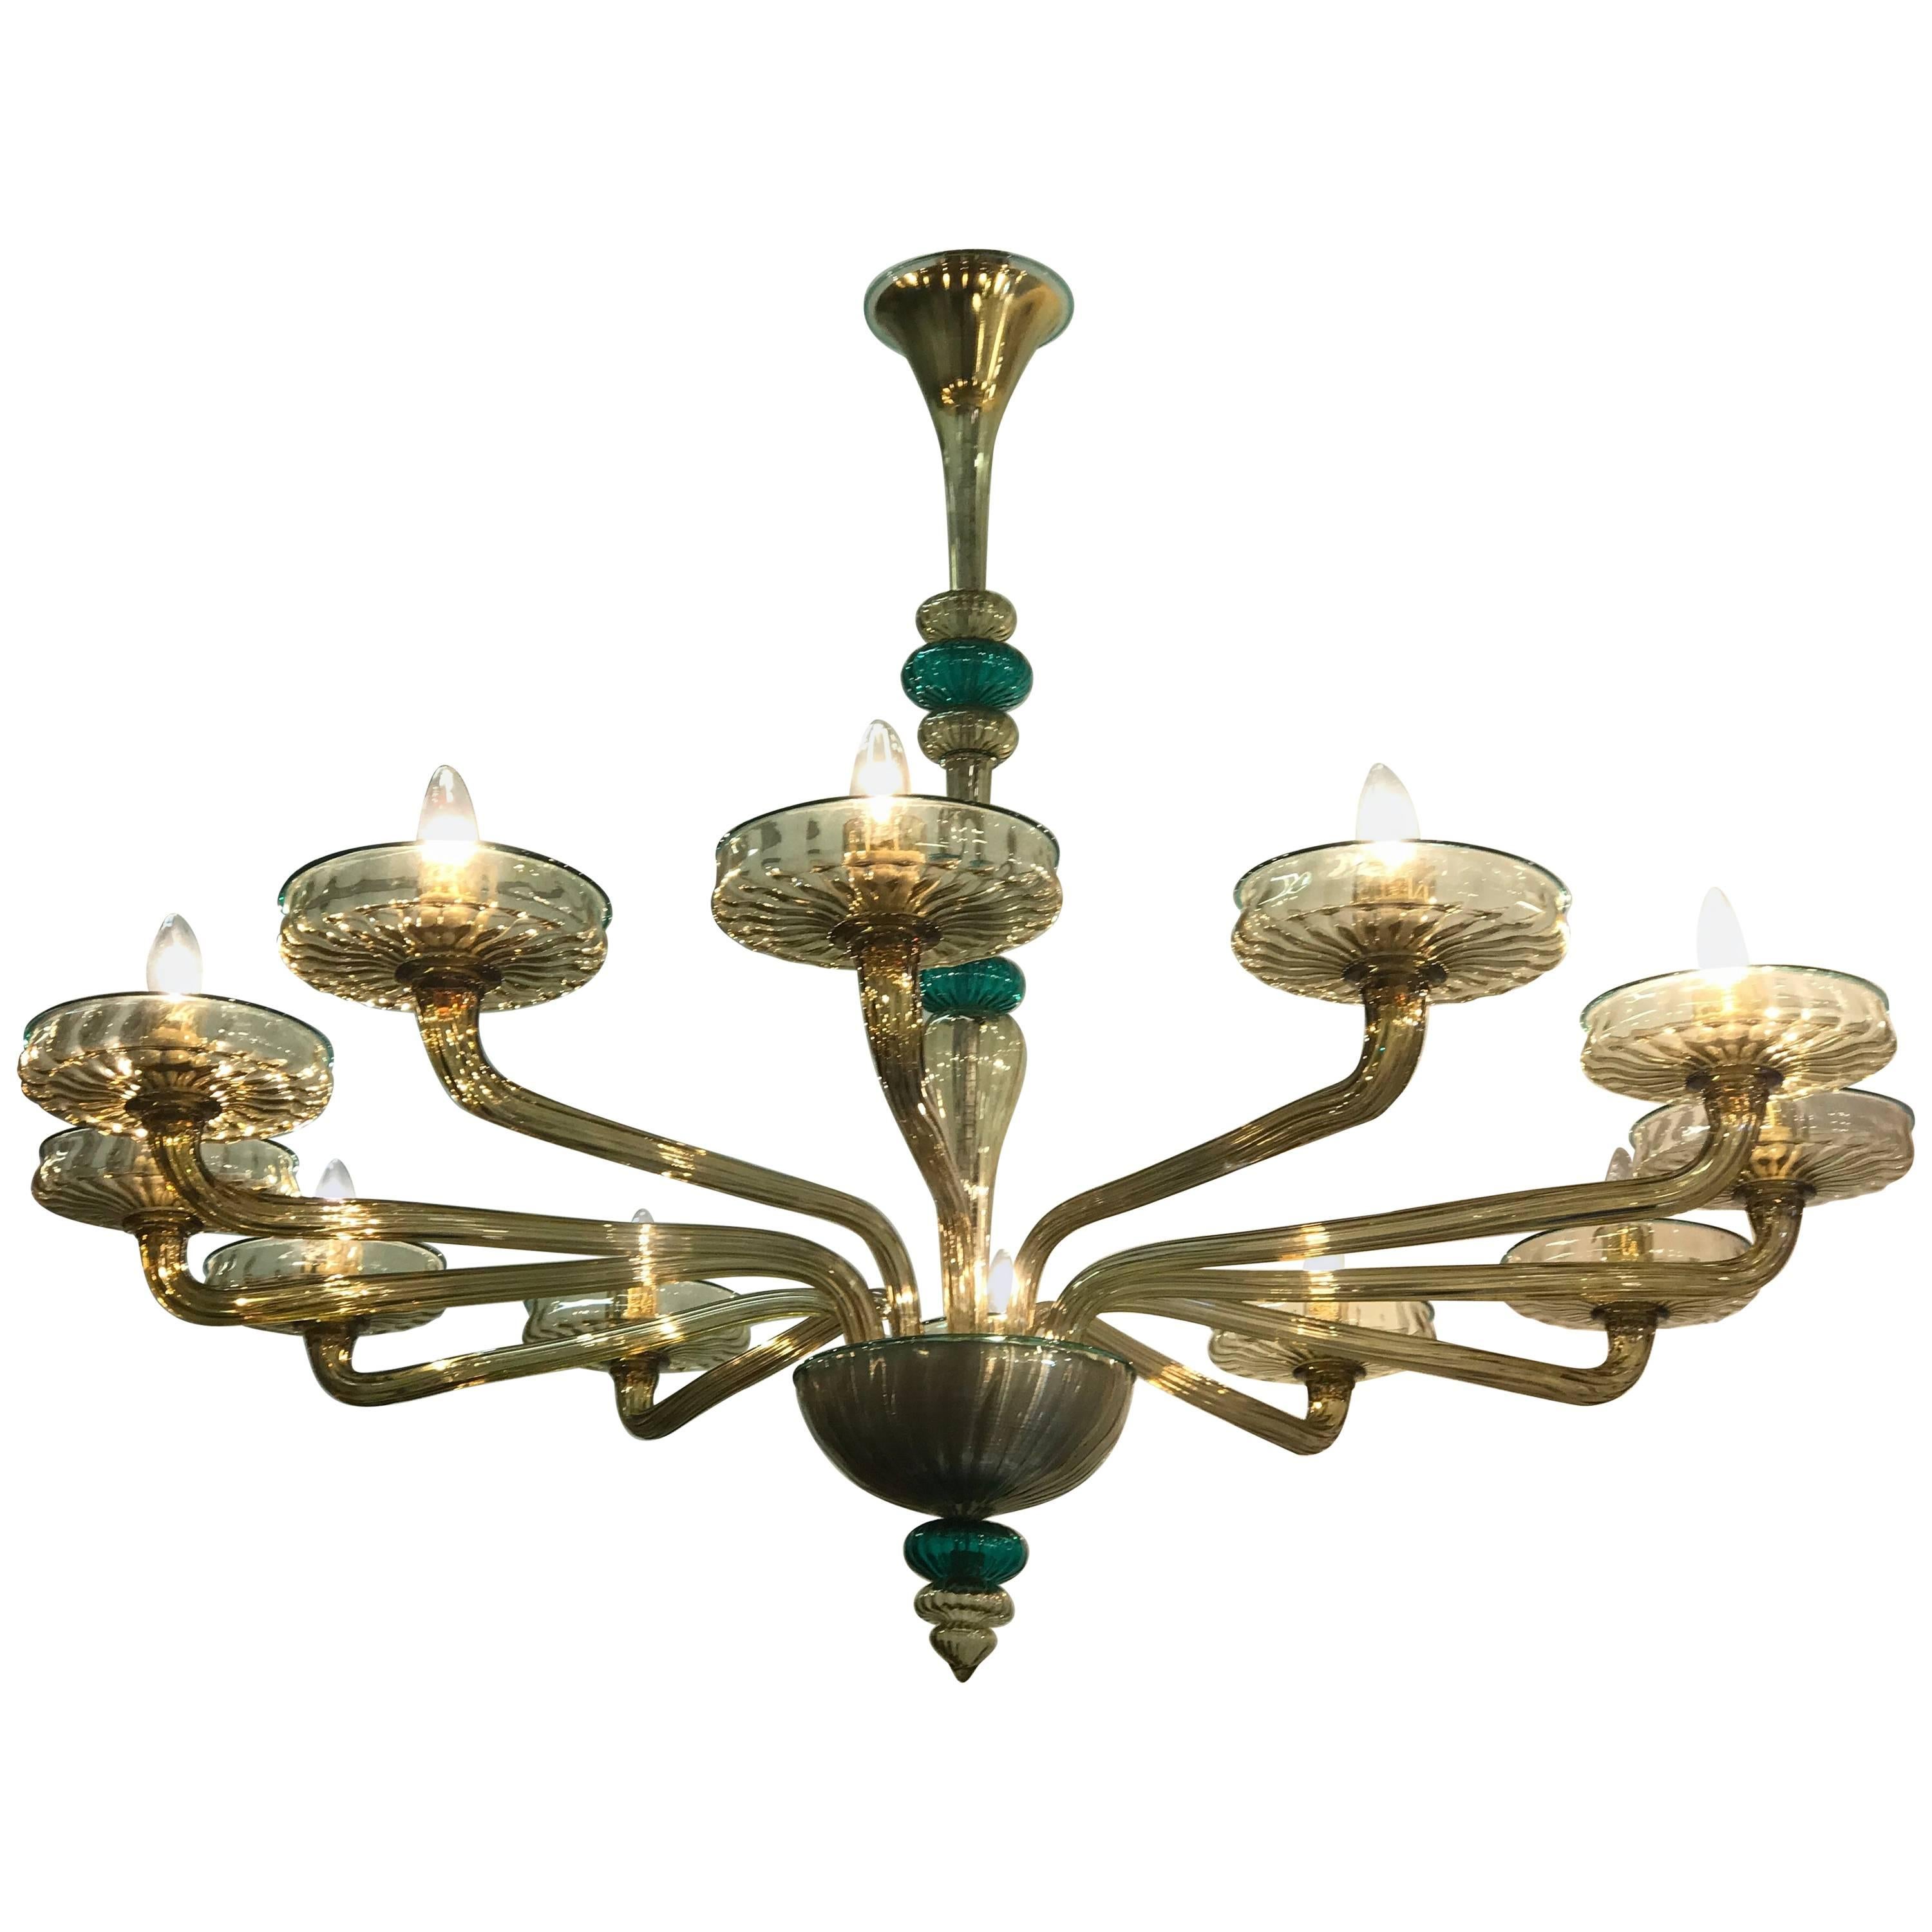 This magnificent chandelier features 12 arms. Excellent vintage condition.
Available the pair.